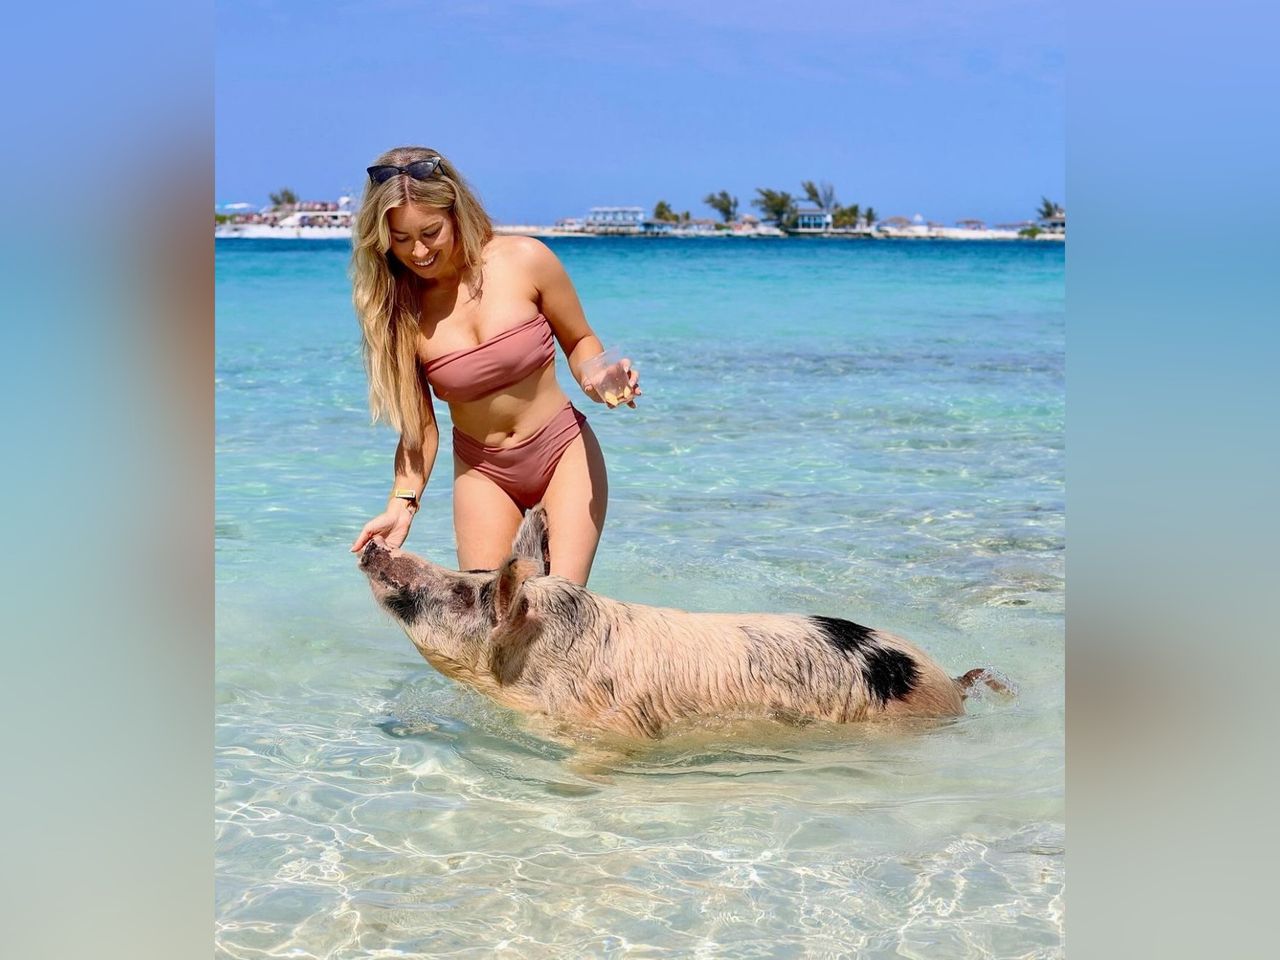 Tiffany Stanley says swimming with pigs on Bahamas beach was ‘dream come true’